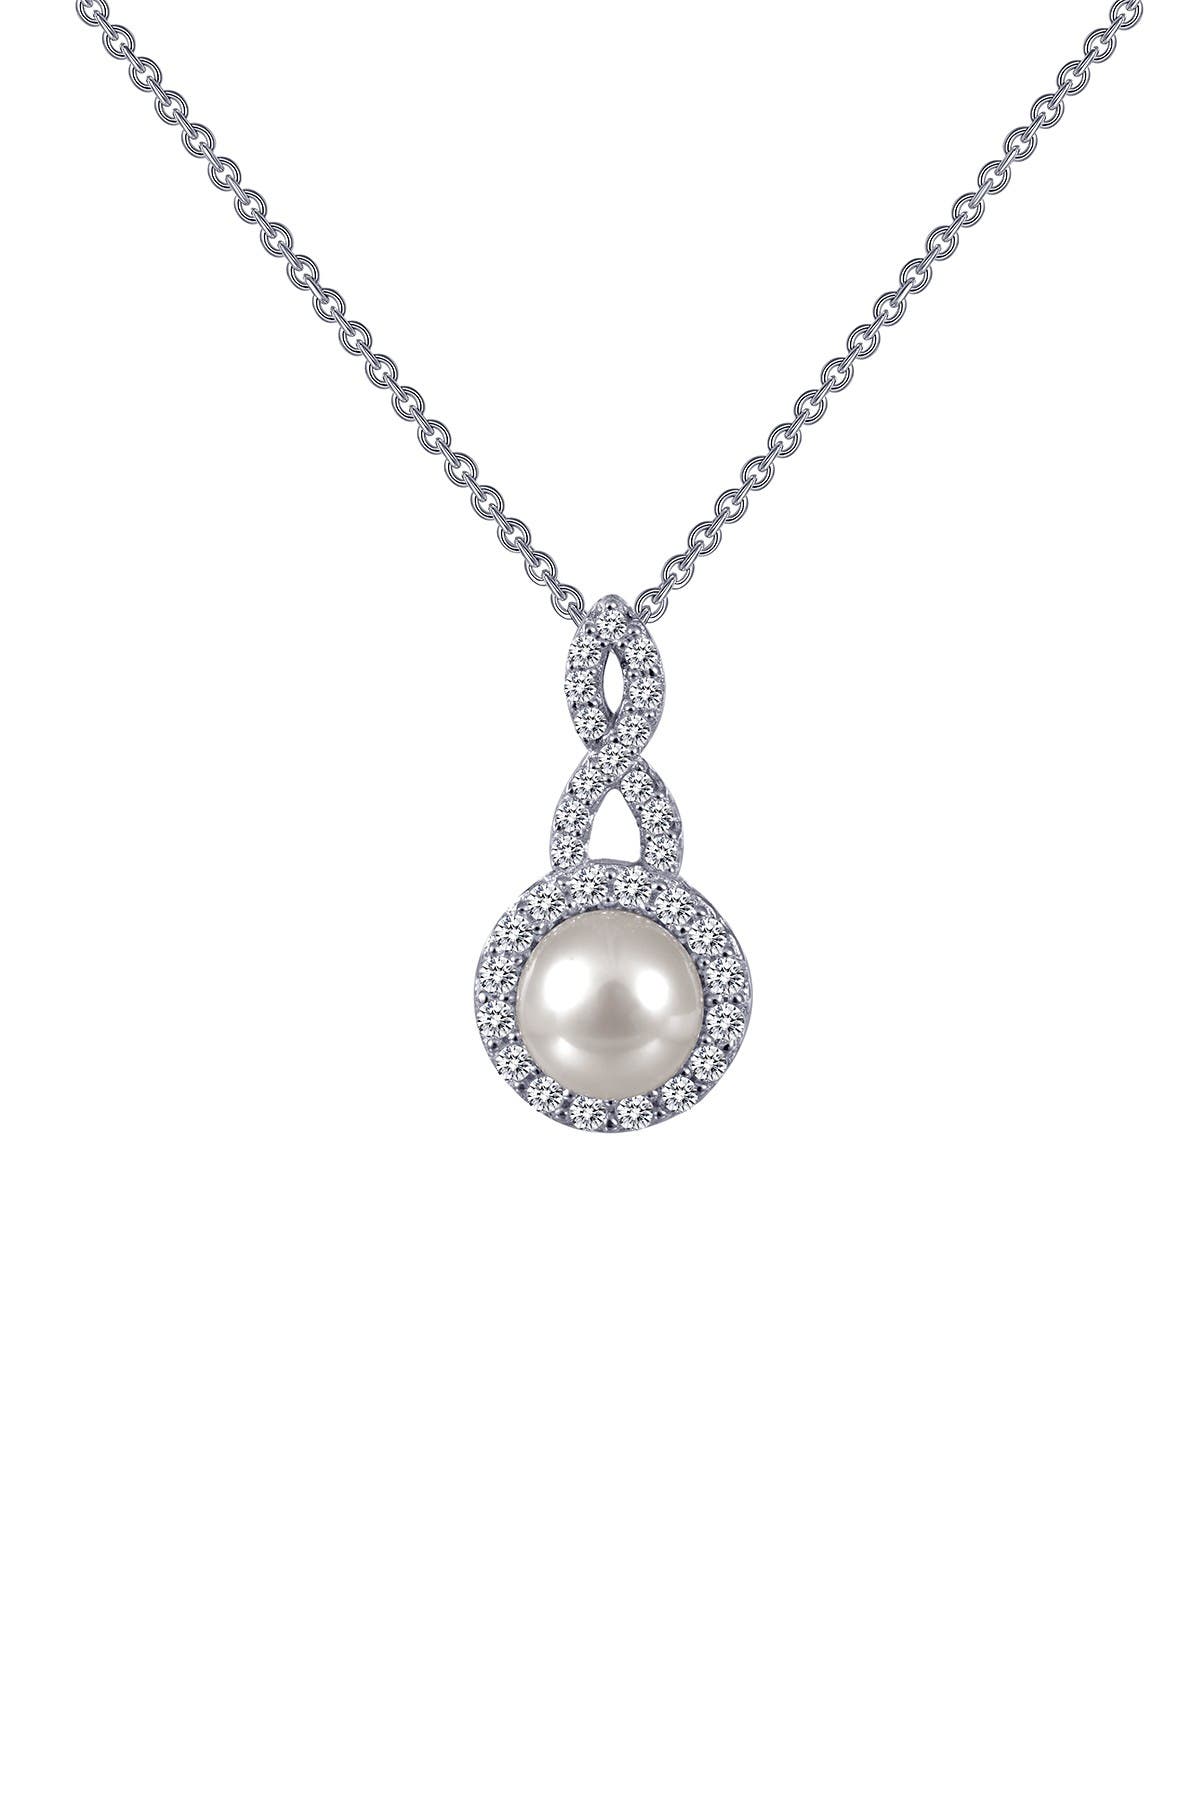 Lafonn Platinum Bonded Sterling Silver 8mm Freshwater Pearl Pendant Necklace In White